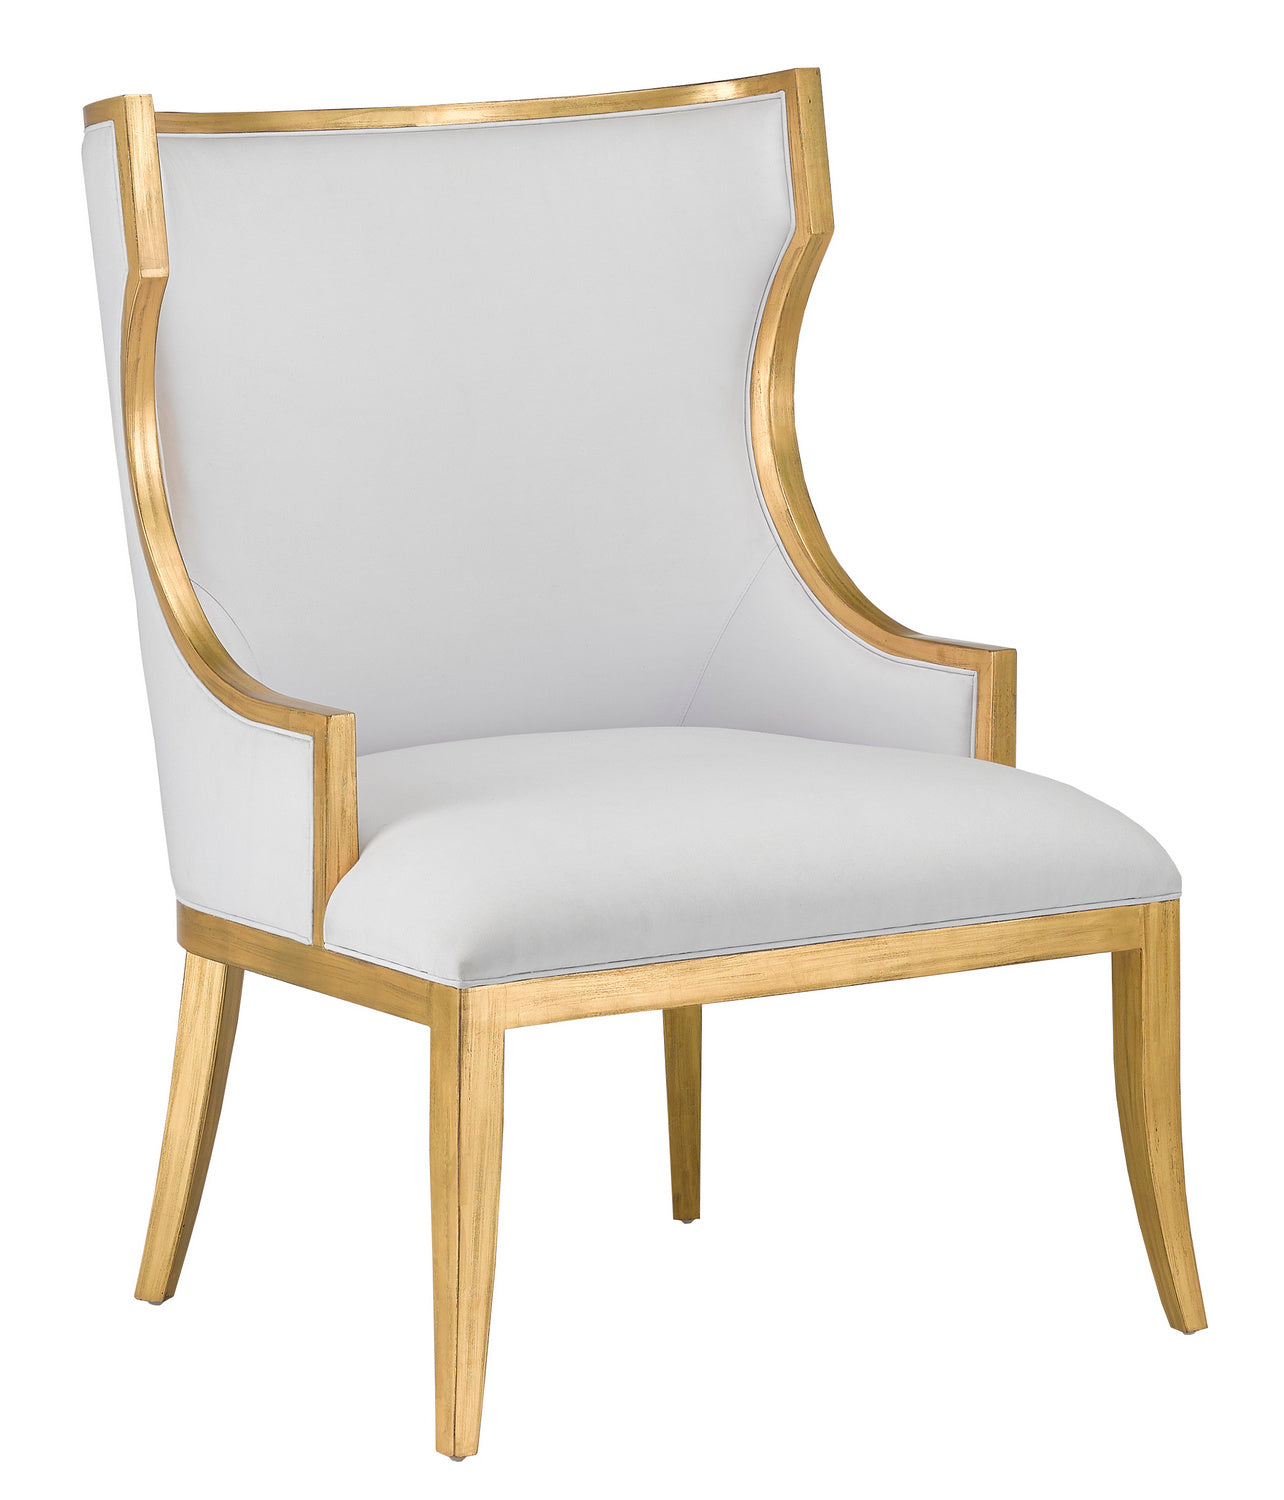 Chair from the Garson collection in Antique Gold finish